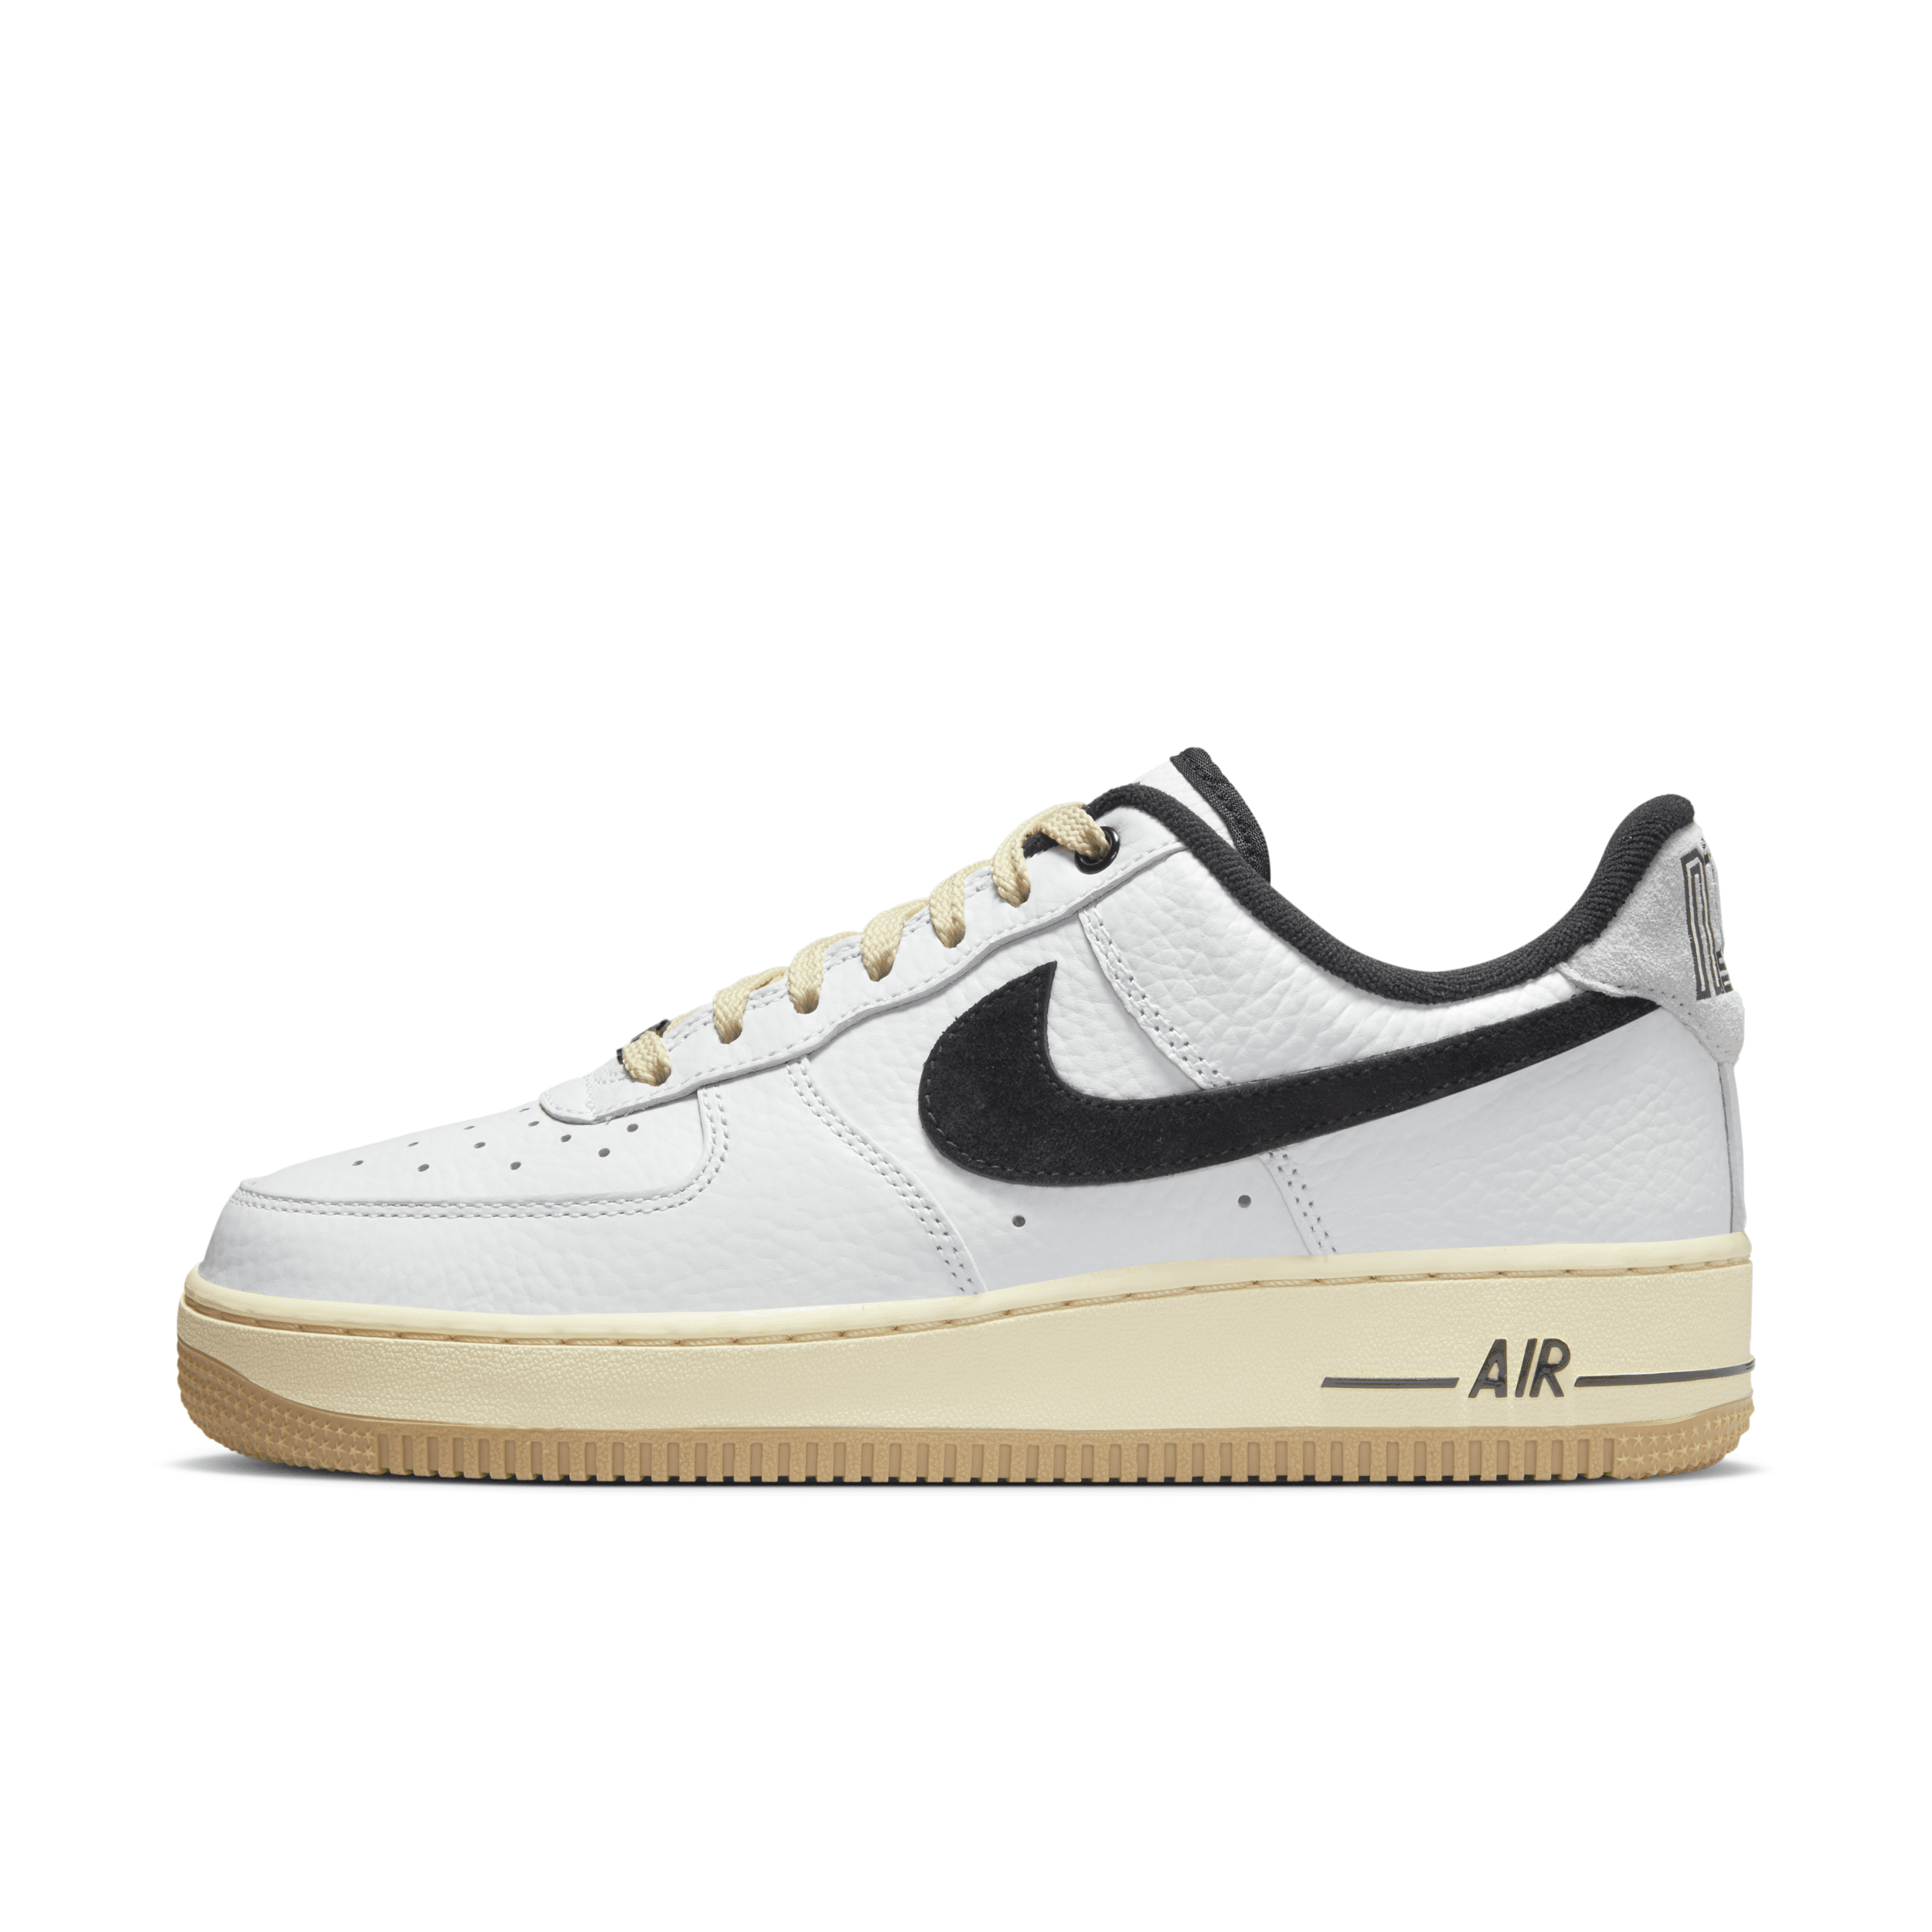 NIKE WOMEN'S AIR FORCE 1 '07 LX SHOES,1003839013